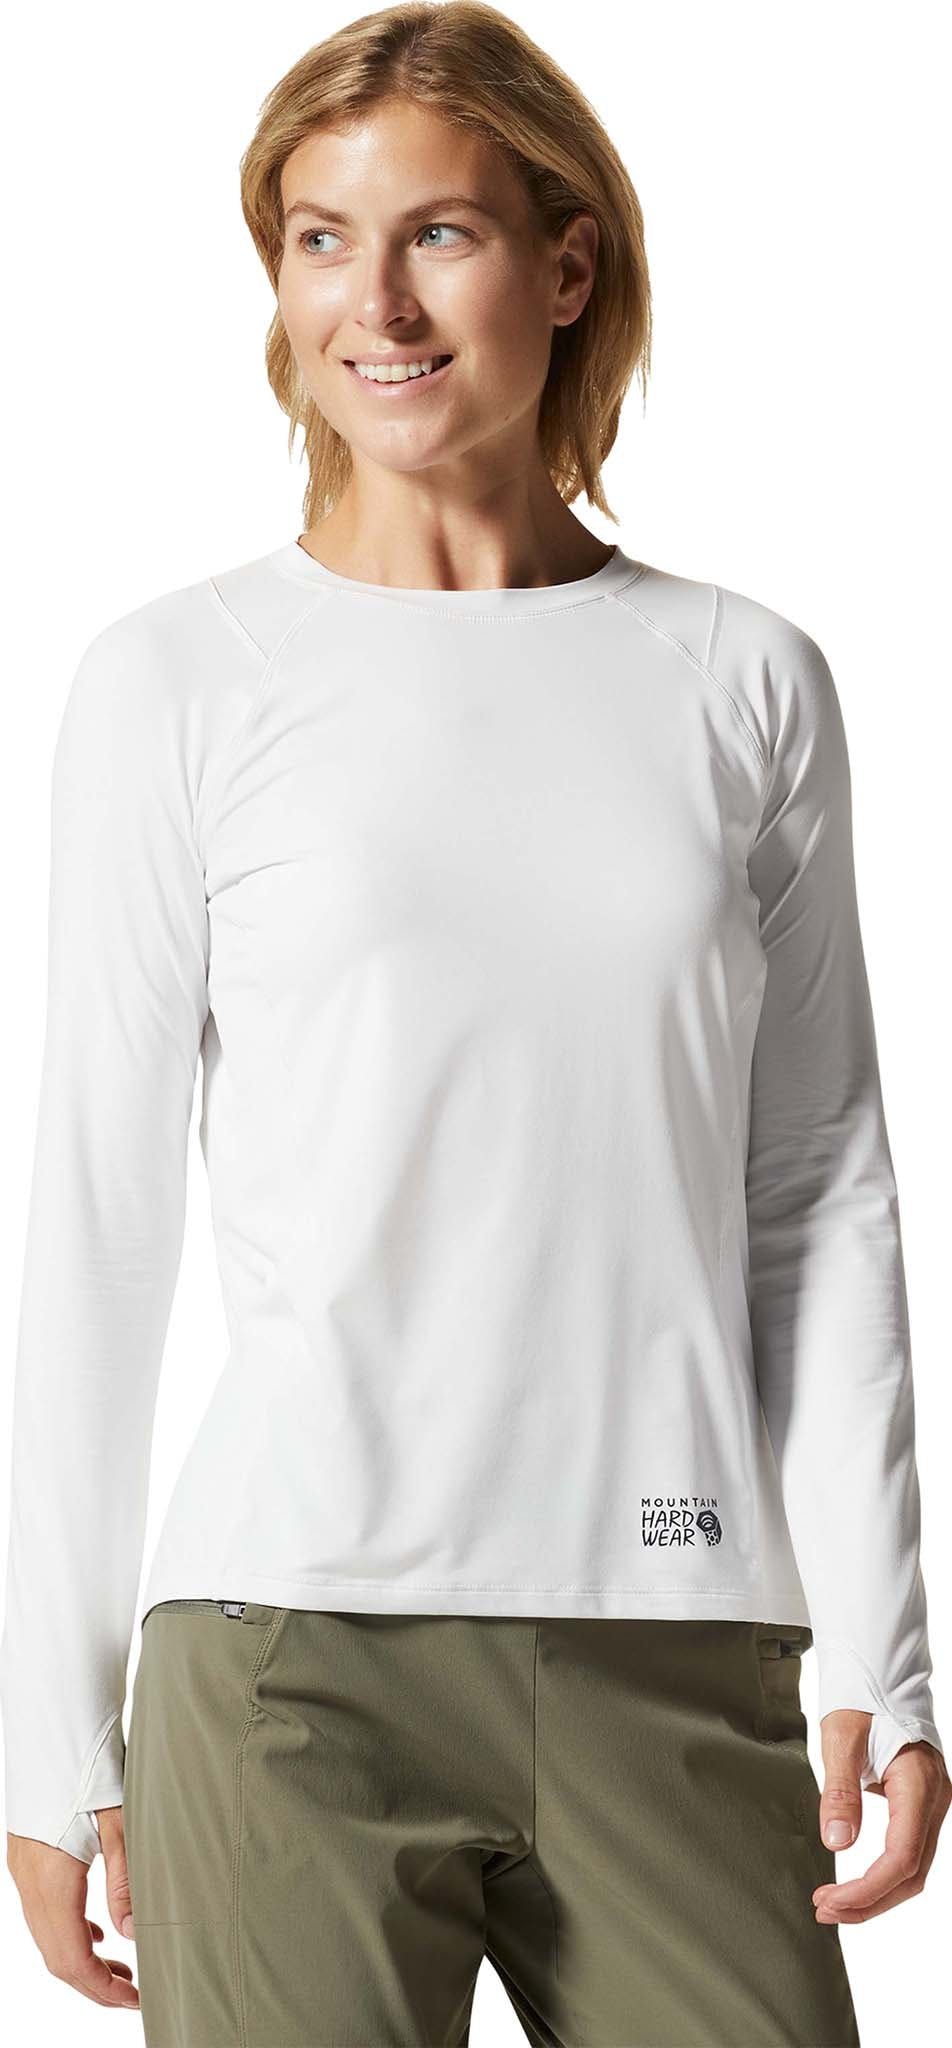 Product image for Crater Lake Long Sleeve T-shirt - Women's